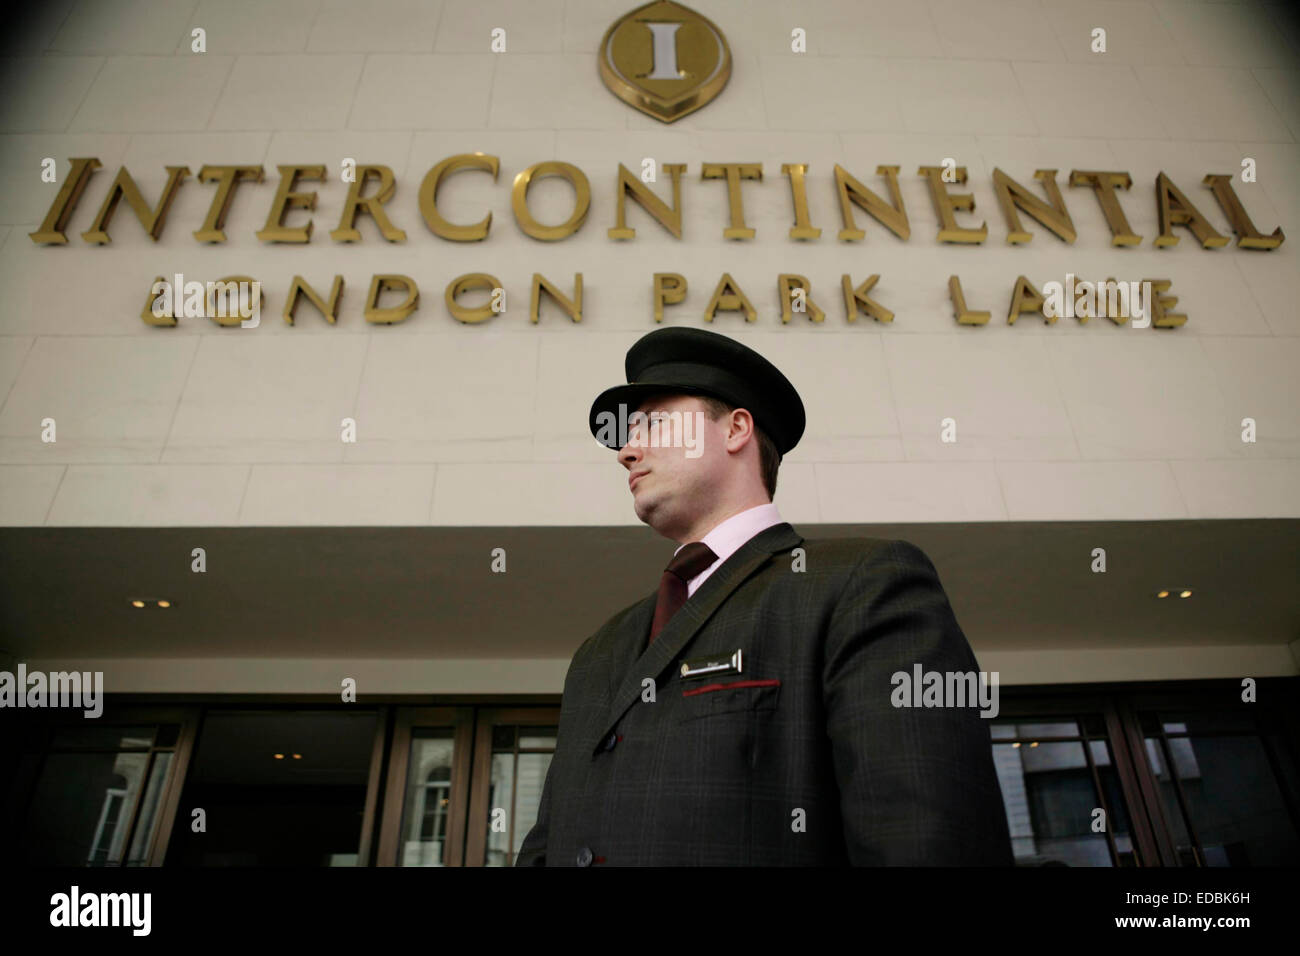 Intercontinental london park lane hi-res stock photography and images -  Alamy